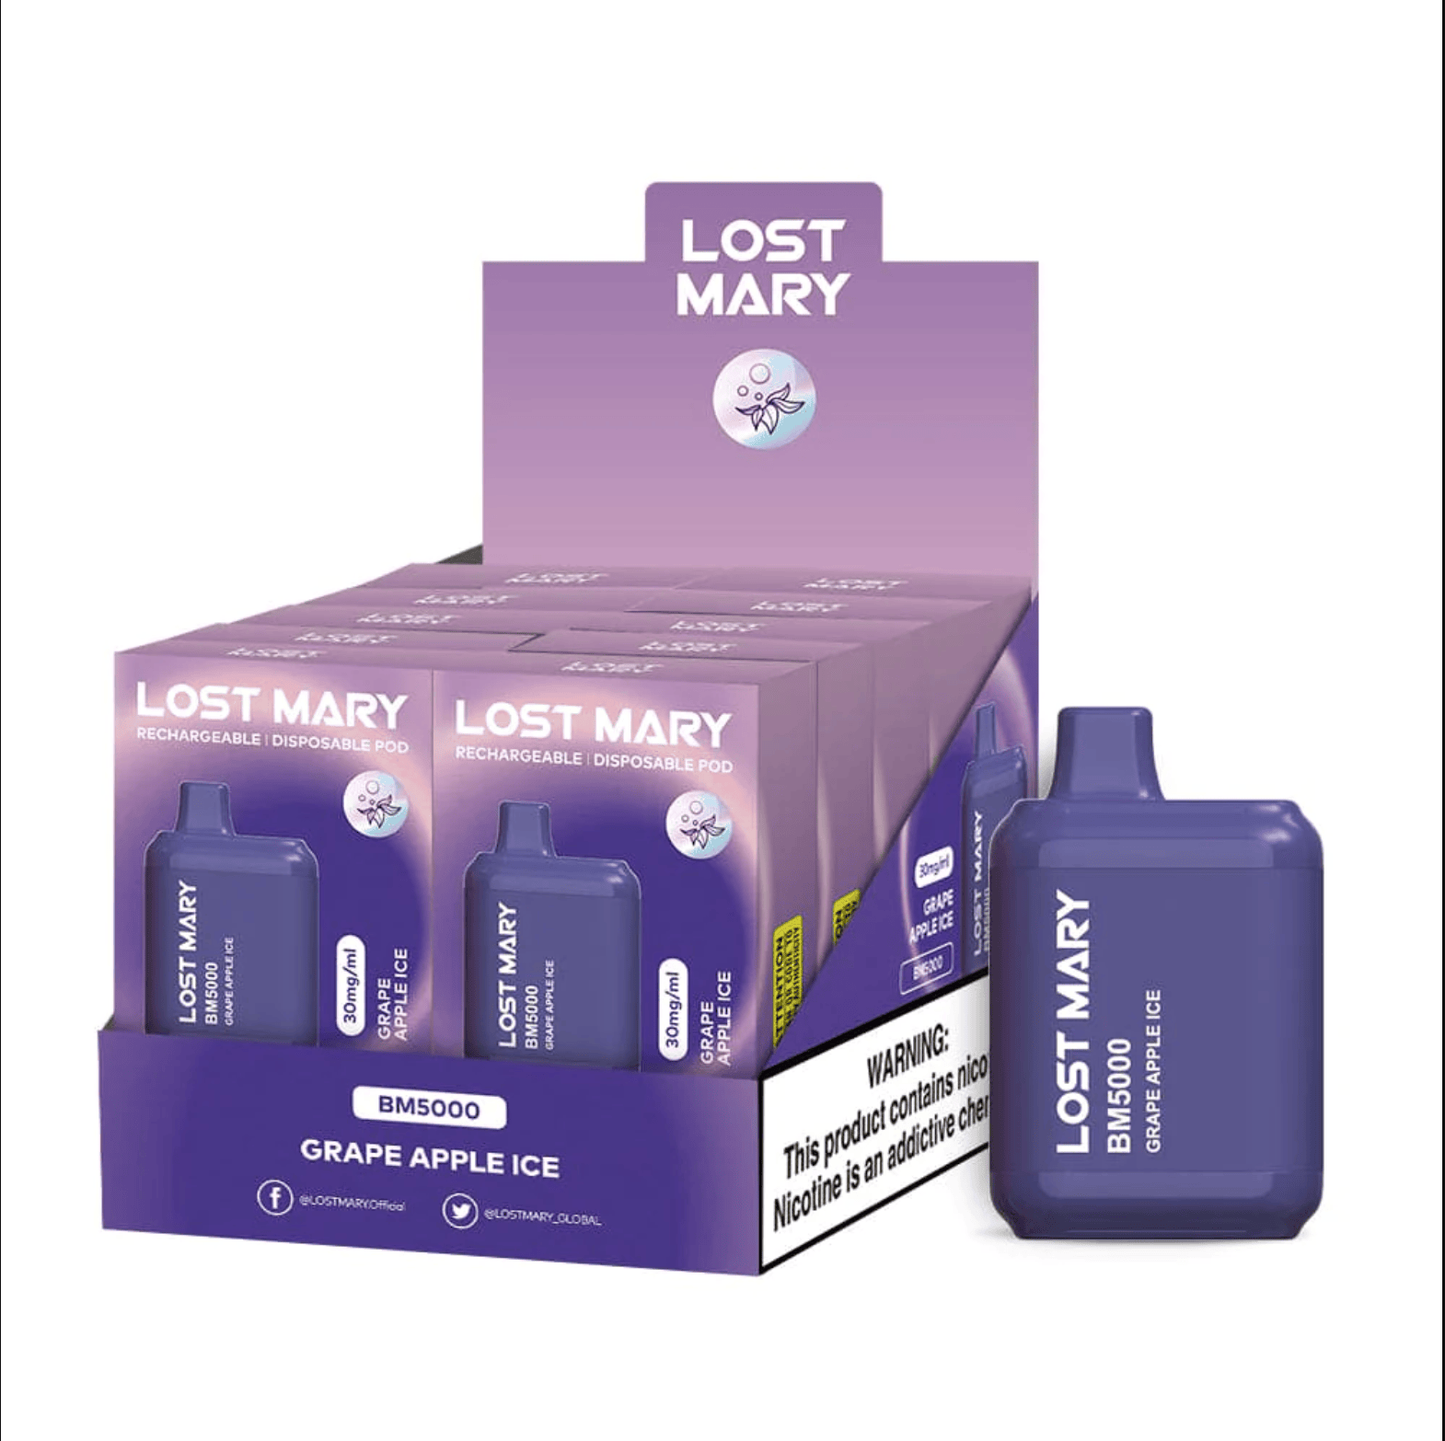 Lost Mary BM5000 Grape Apple Ice flavored disposable vape device and box.